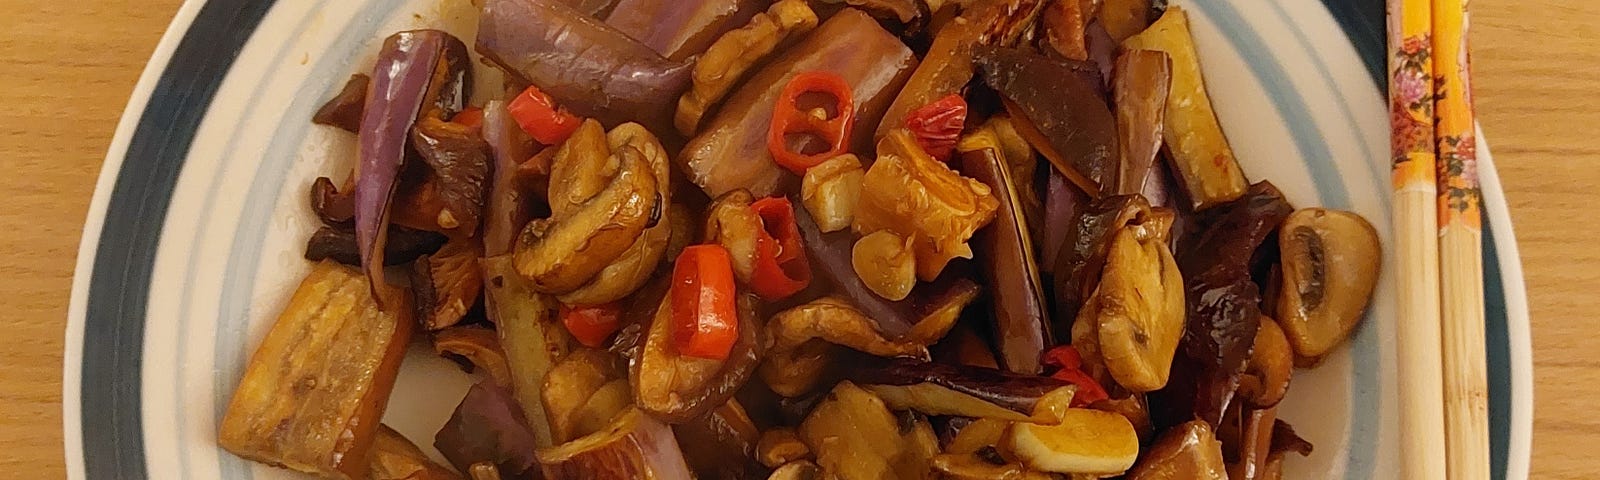 Cantonese Style Soy Sauce-Braised Eggplants and Mushrooms